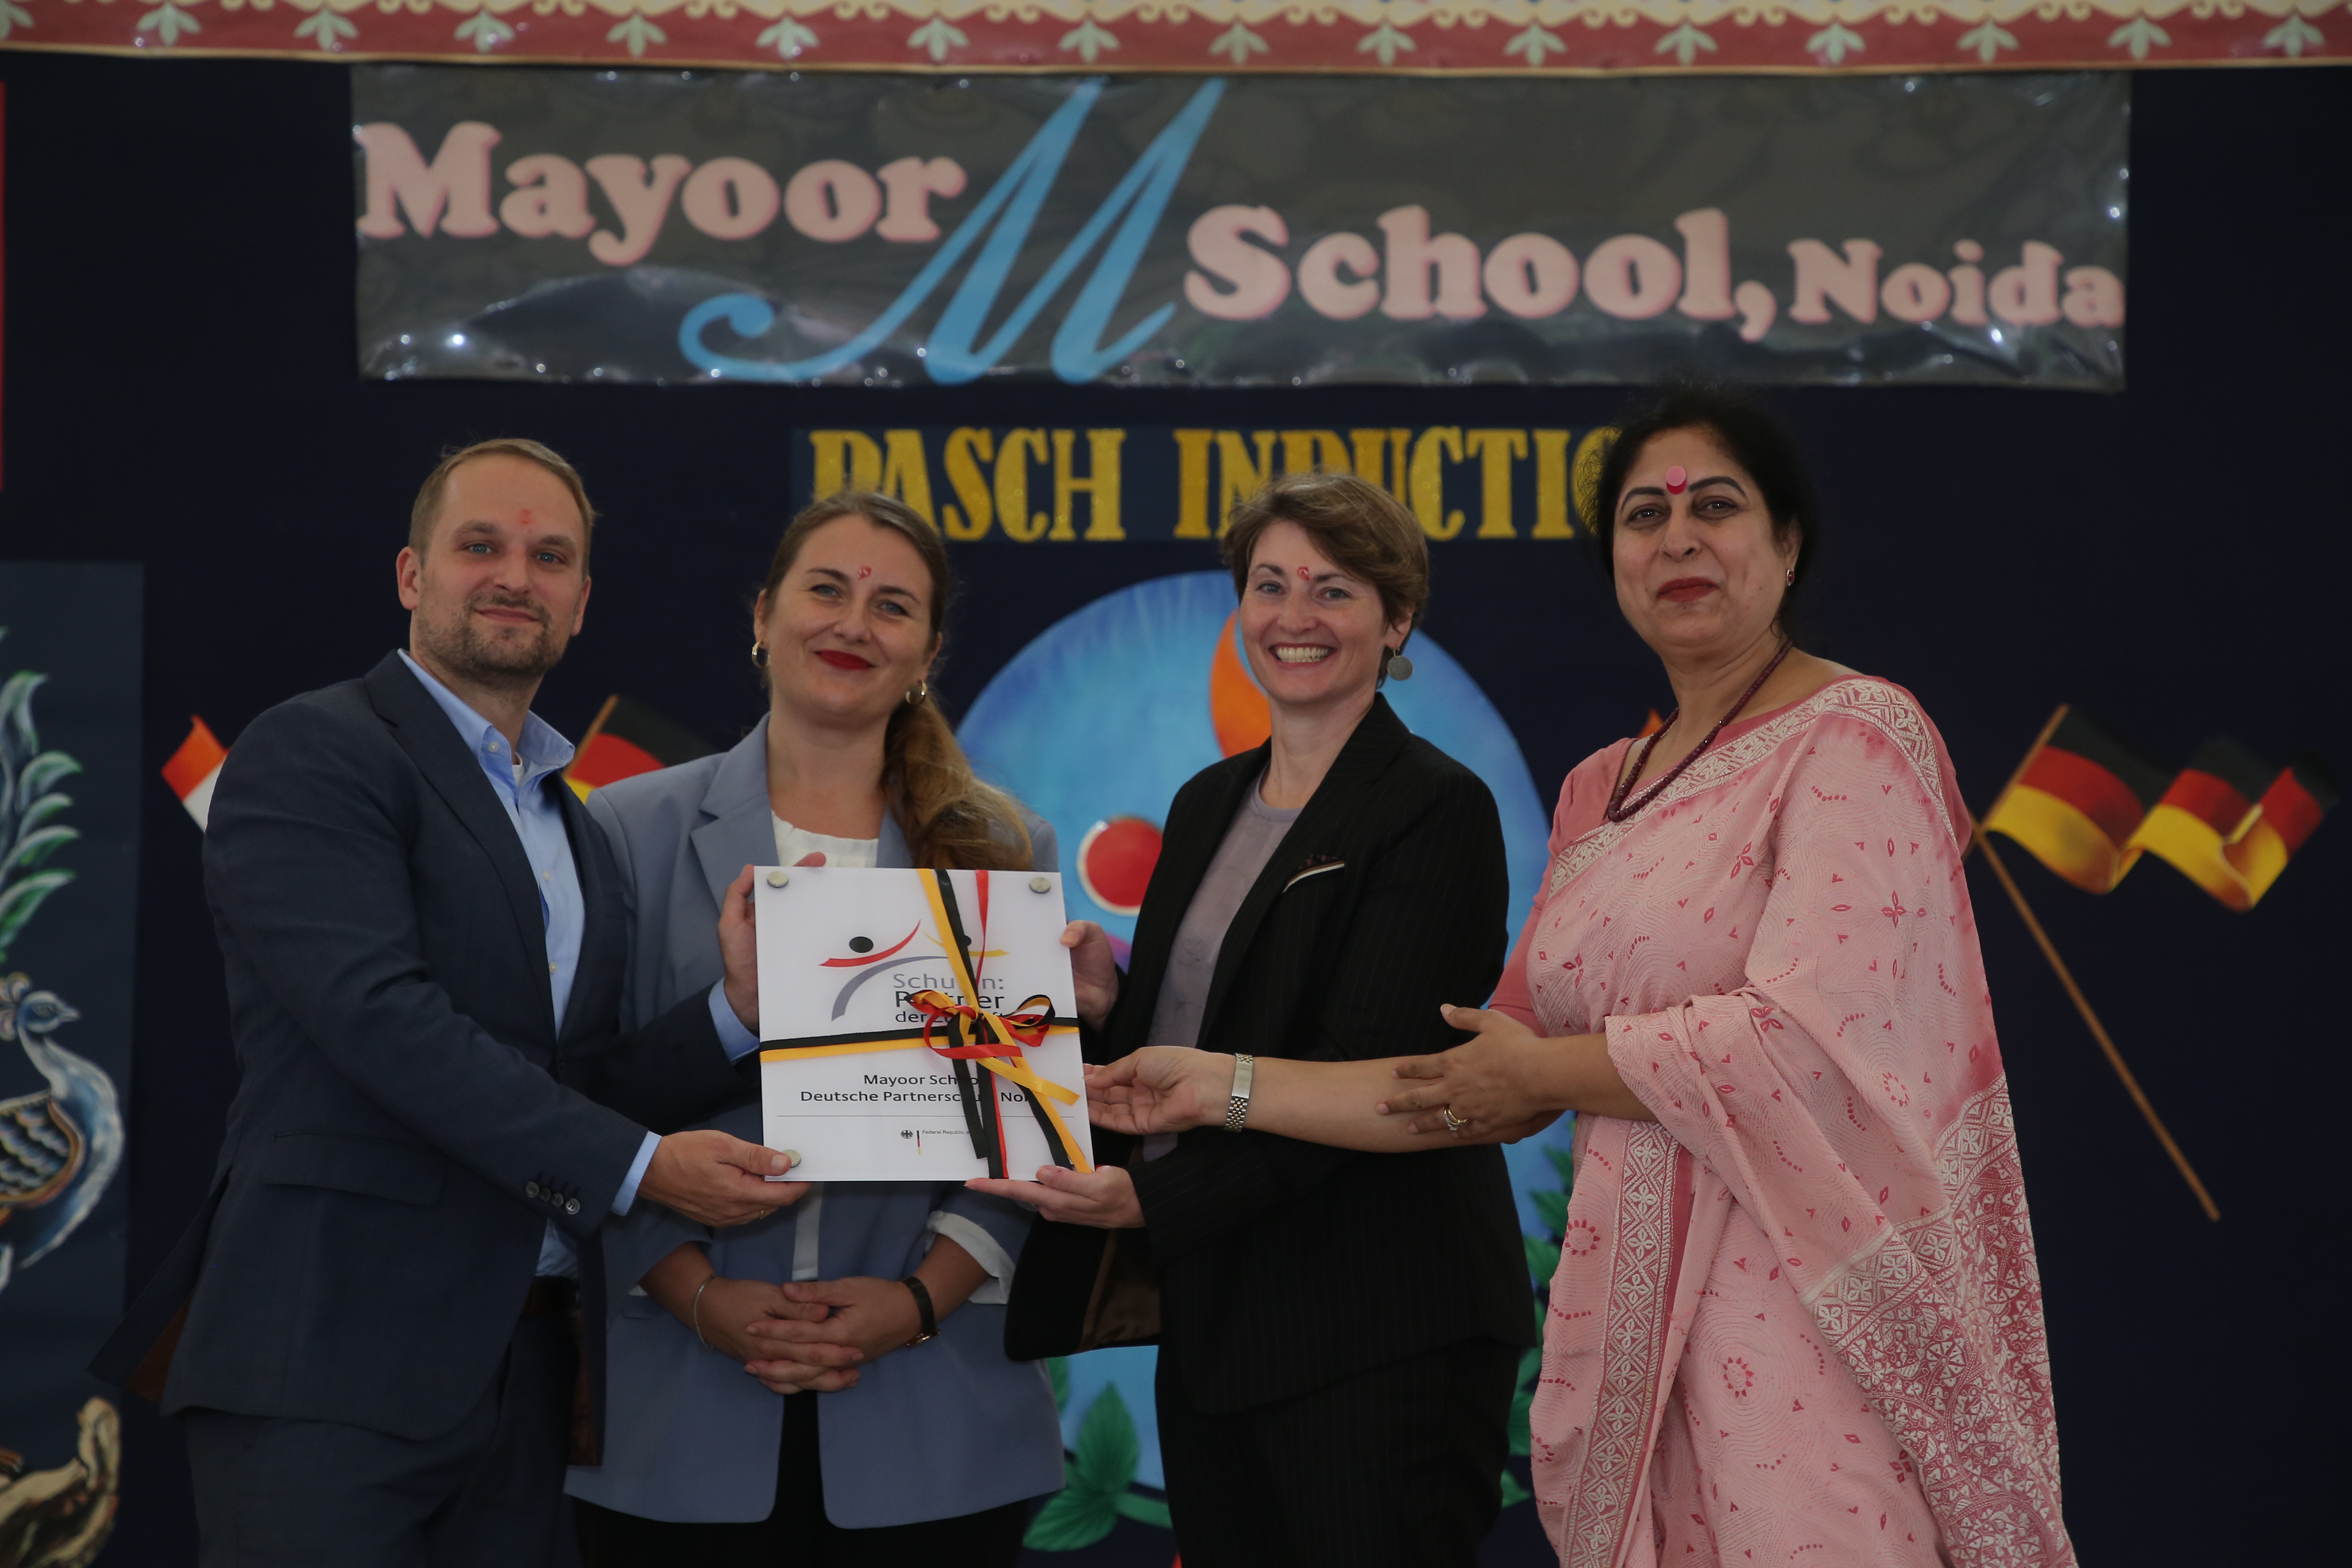 Mayoor wins recognition as PASCH school